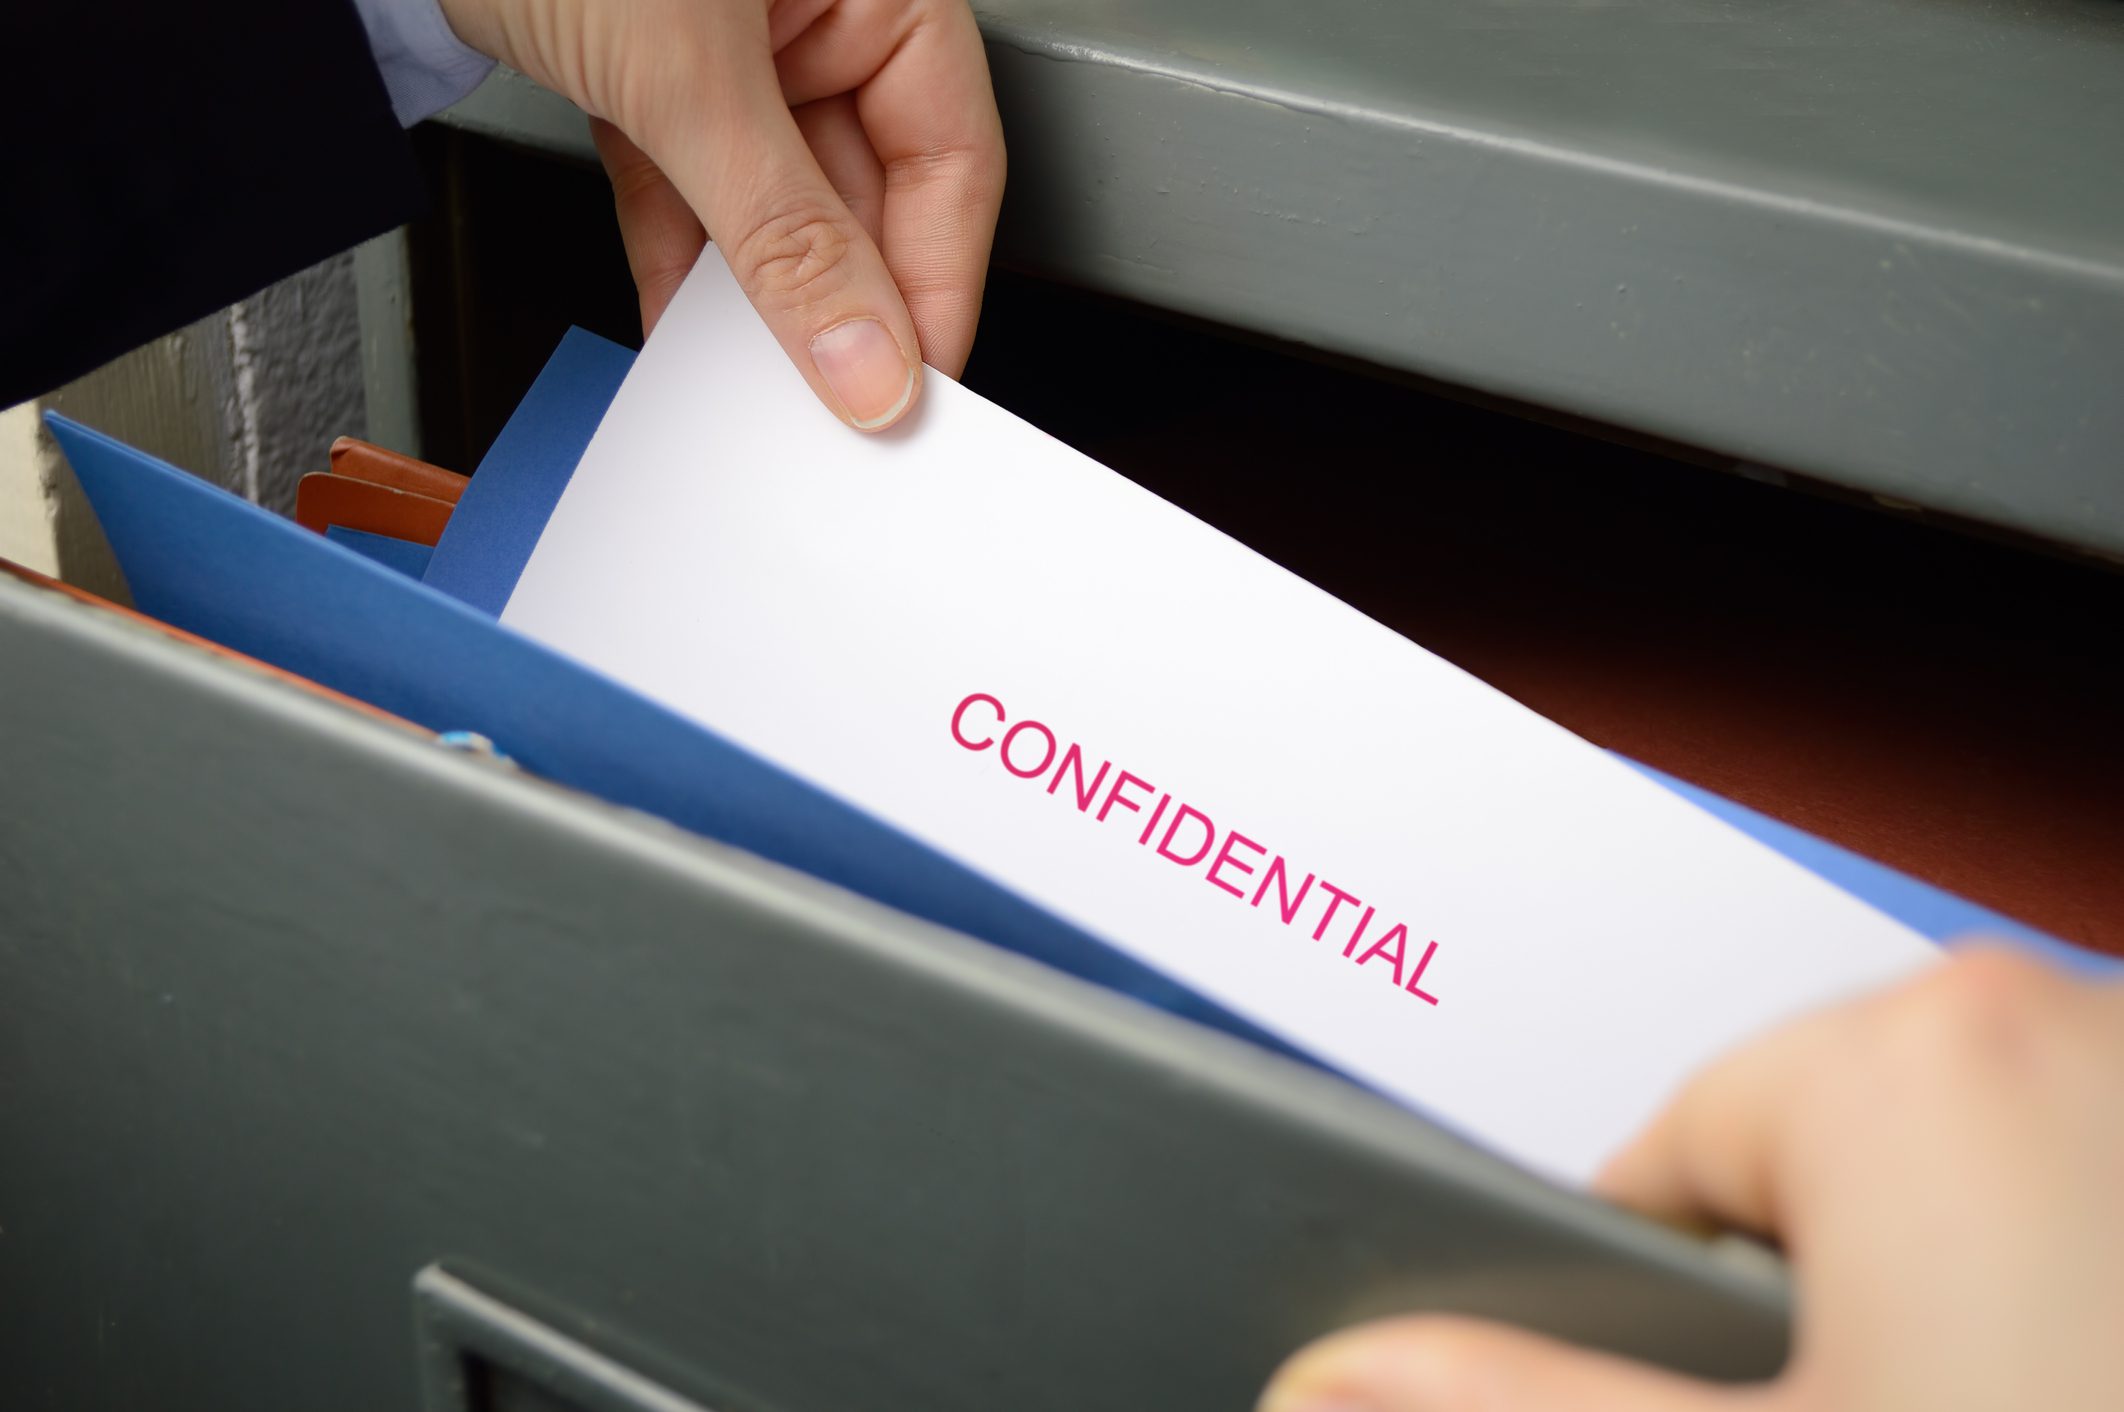 Hands carefully reaching for the confidential documents